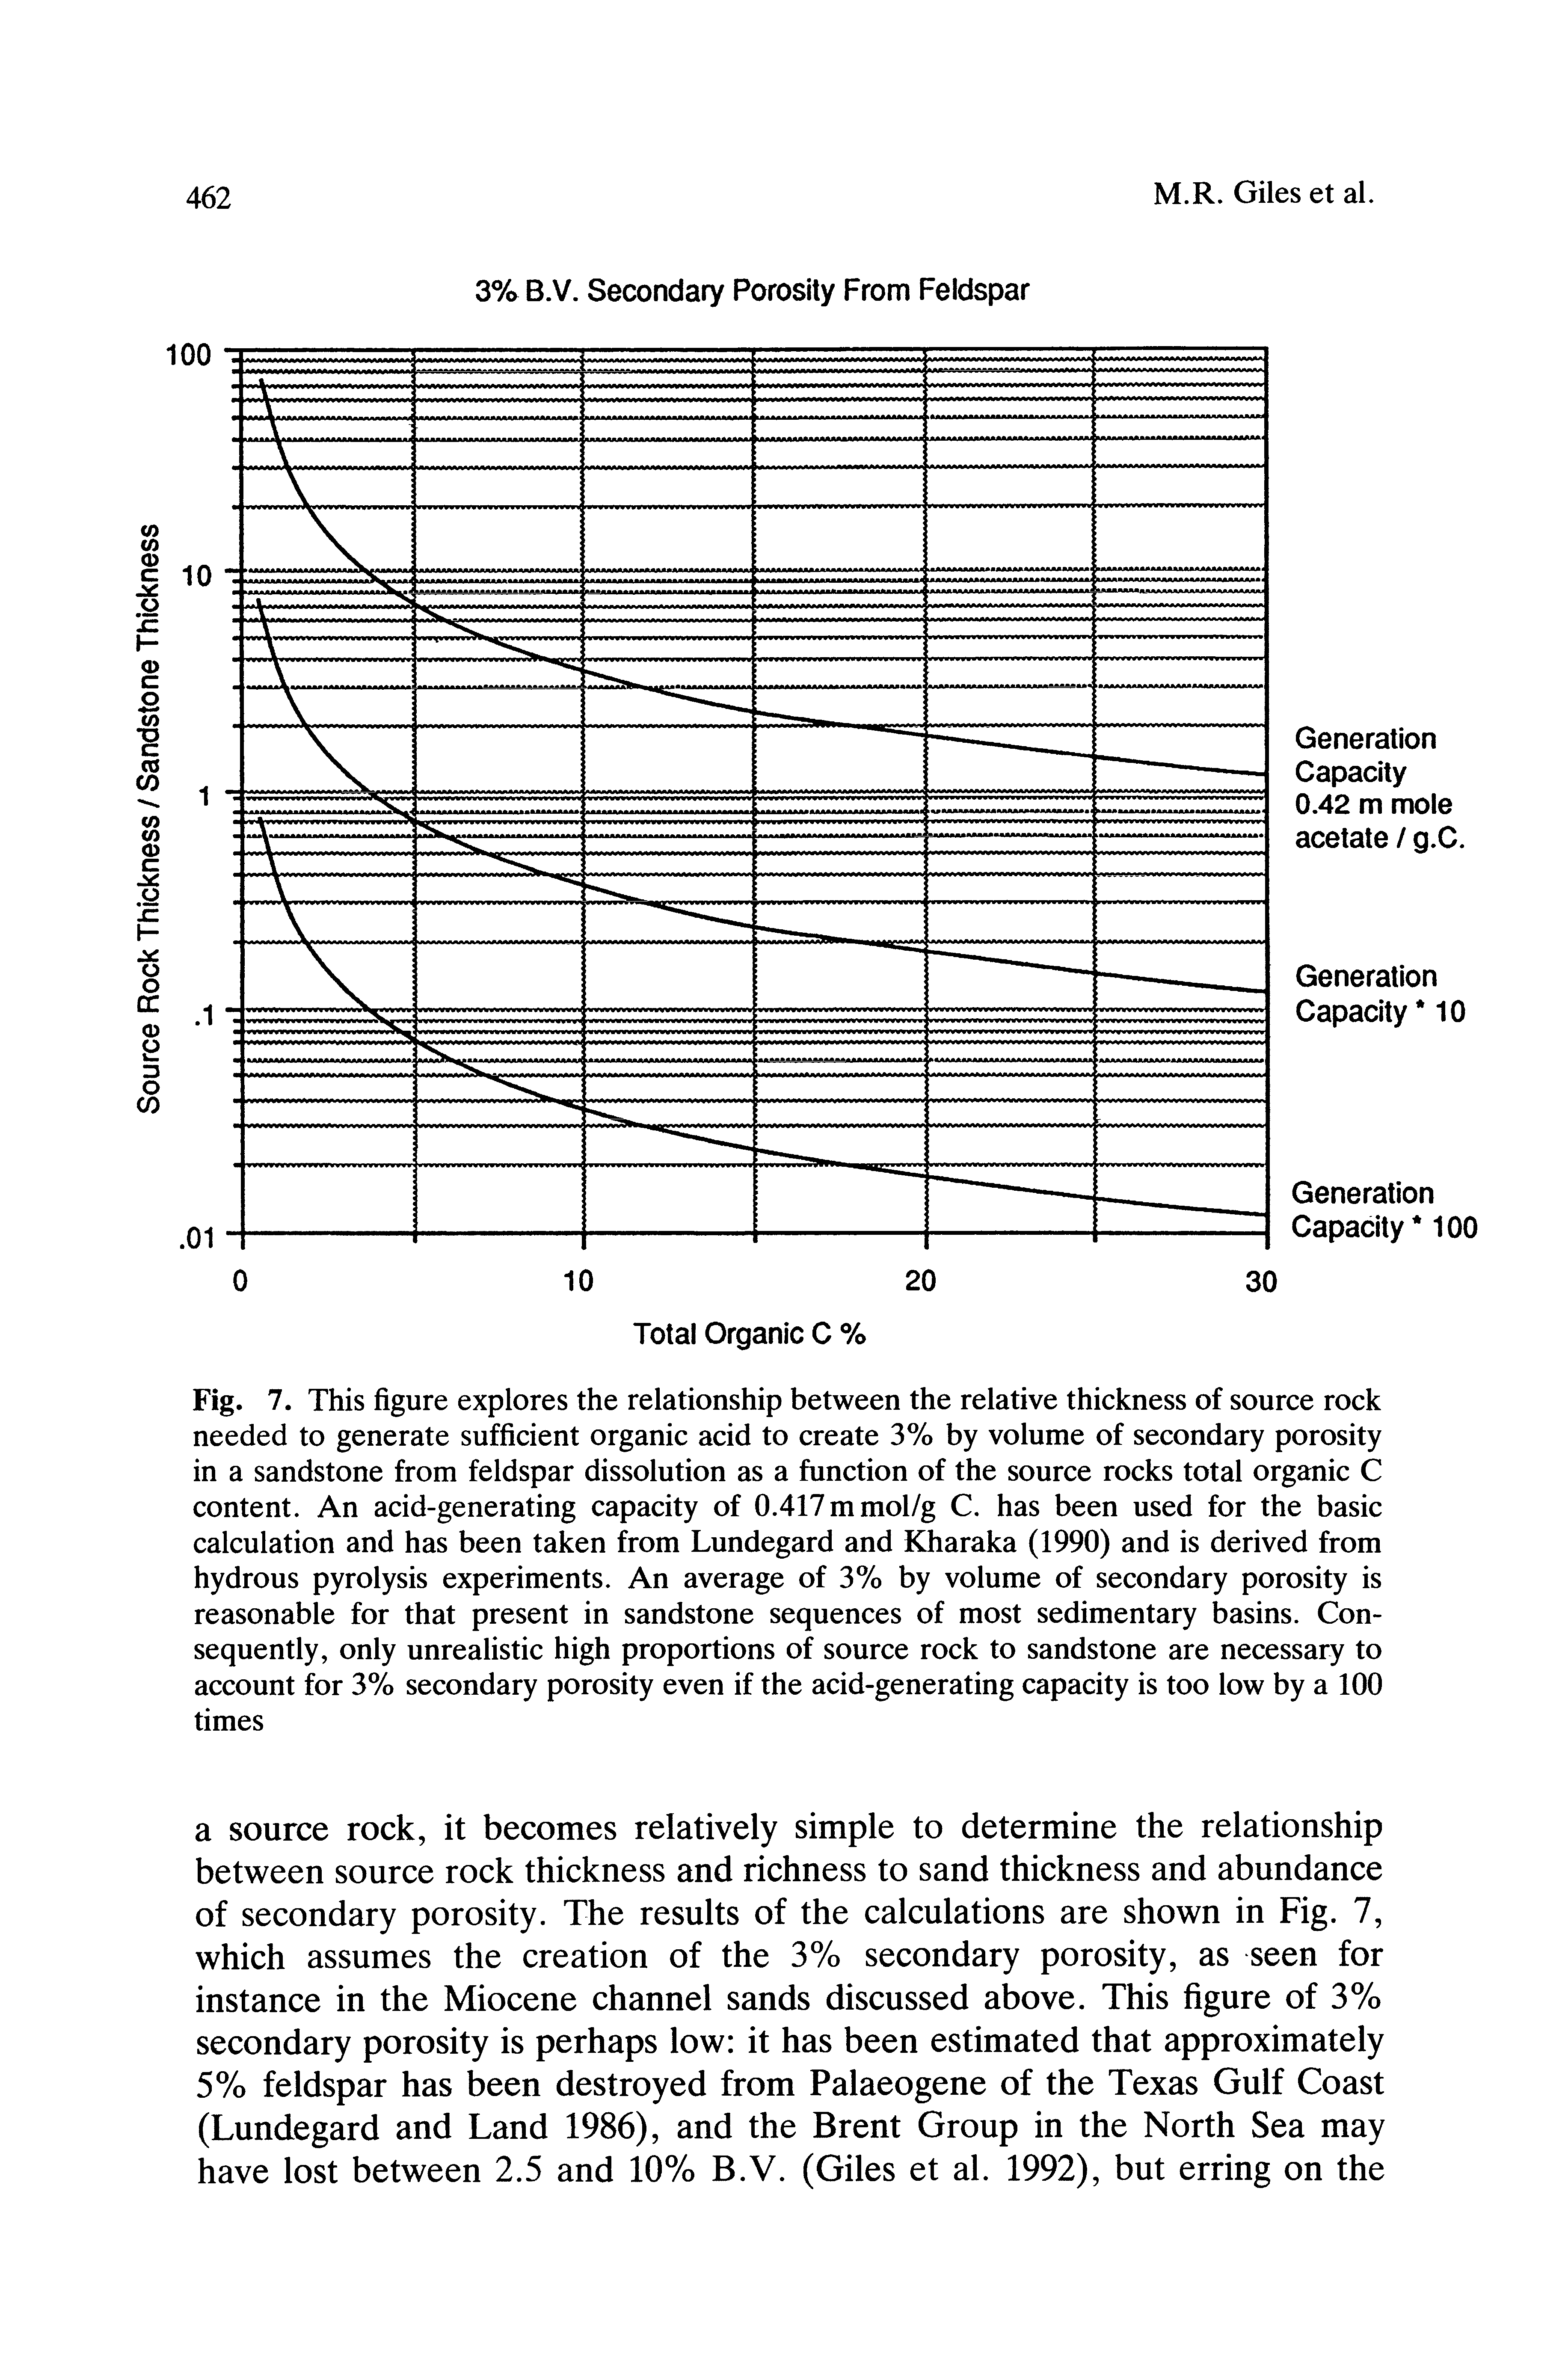 Fig. 7. This figure explores the relationship between the relative thickness of source rock needed to generate sufficient organic acid to create 3% by volume of secondary porosity in a sandstone from feldspar dissolution as a function of the source rocks total organic C content. An acid-generating capacity of 0.417 mmol/g C. has been used for the basic calculation and has been taken from Lundegard and Kharaka (1990) and is derived from hydrous pyrolysis experiments. An average of 3% by volume of secondary porosity is reasonable for that present in sandstone sequences of most sedimentary basins. Consequently, only unrealistic high proportions of source rock to sandstone are necessary to account for 3% secondary porosity even if the acid-generating capacity is too low by a 100 times...